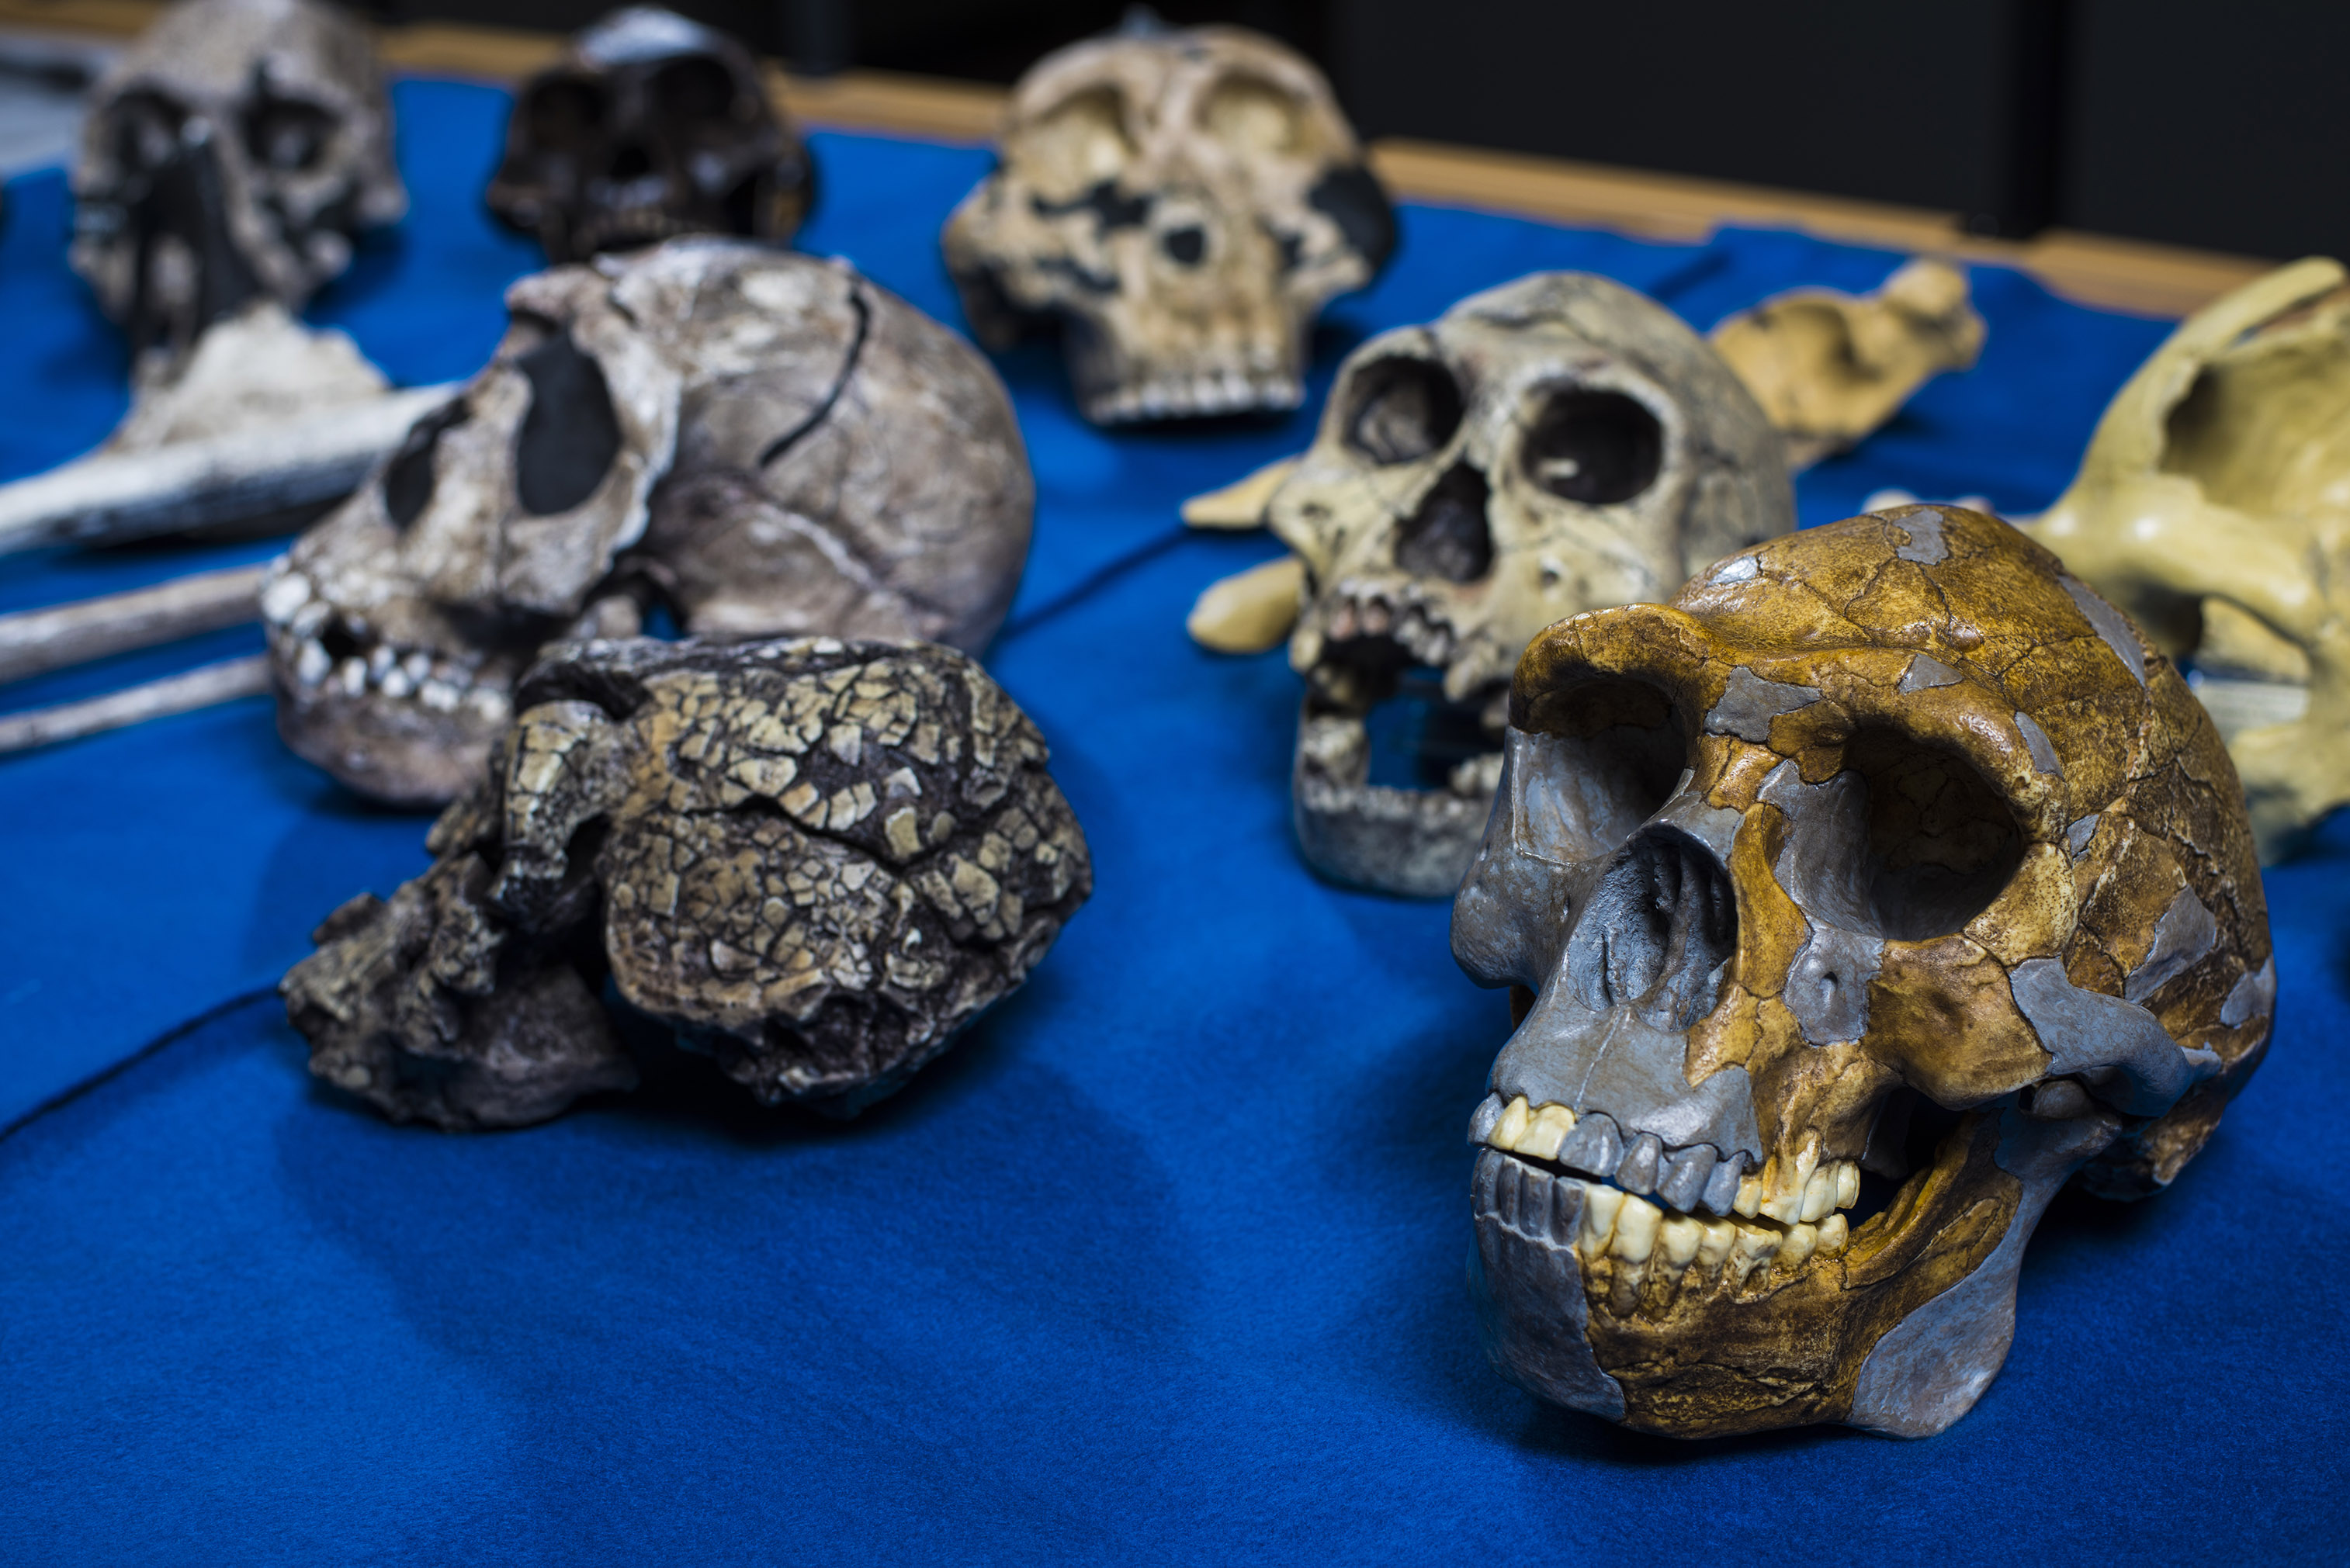 Dark grey and gold casts of fragmented hominid skulls as displayed on a royal blue table.